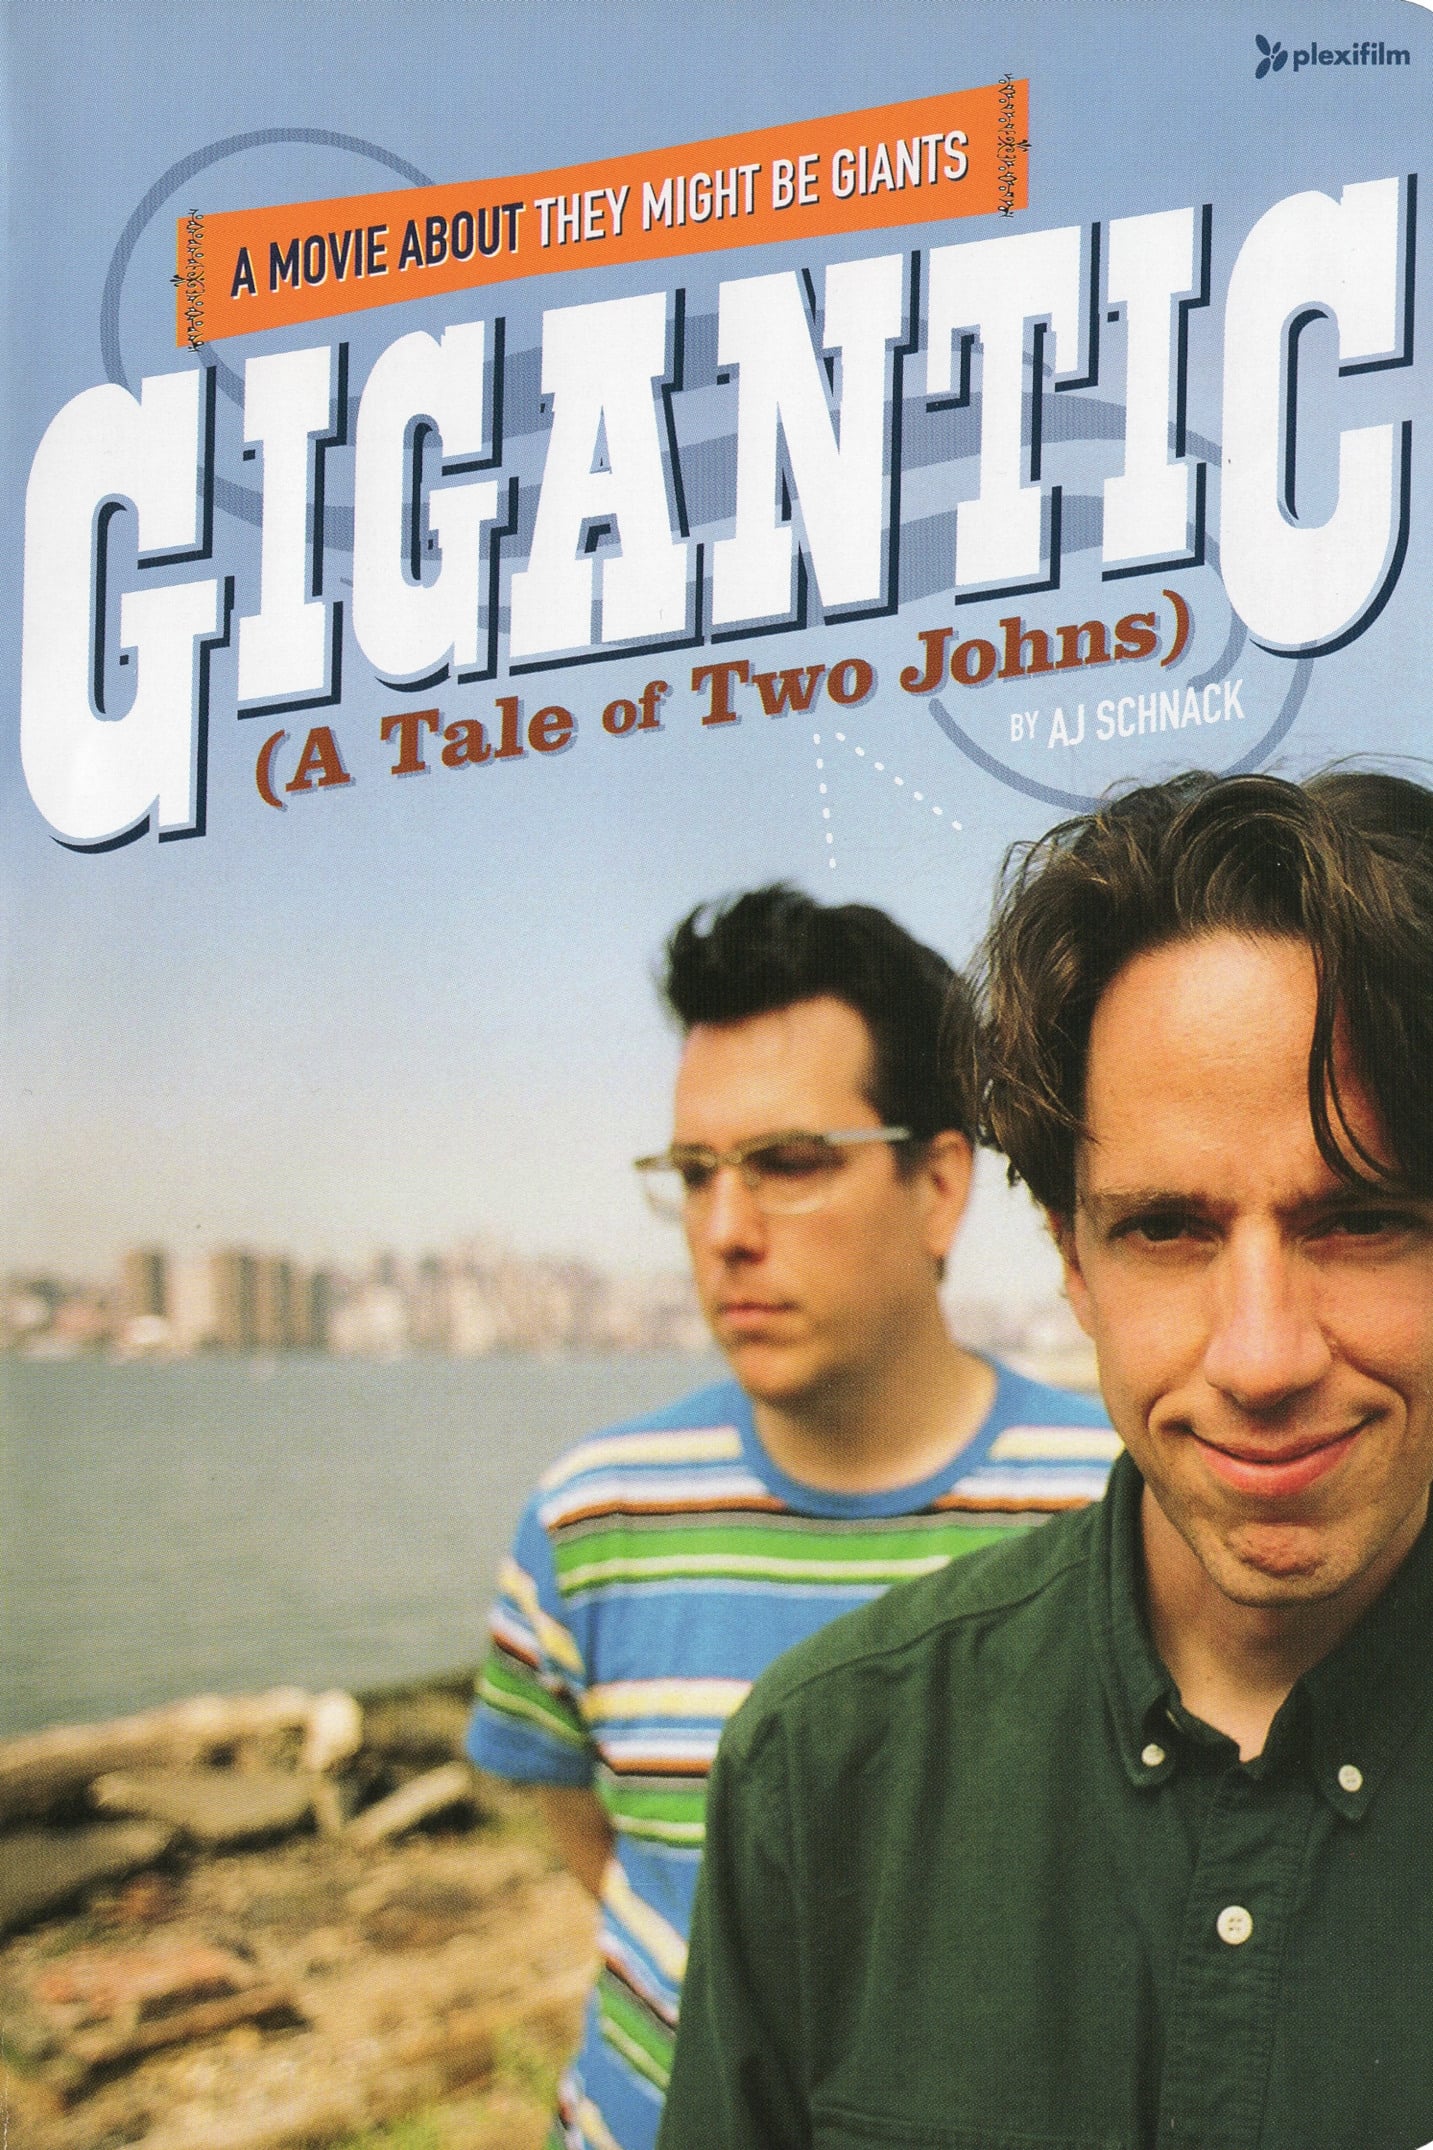 Gigantic (A Tale of Two Johns)